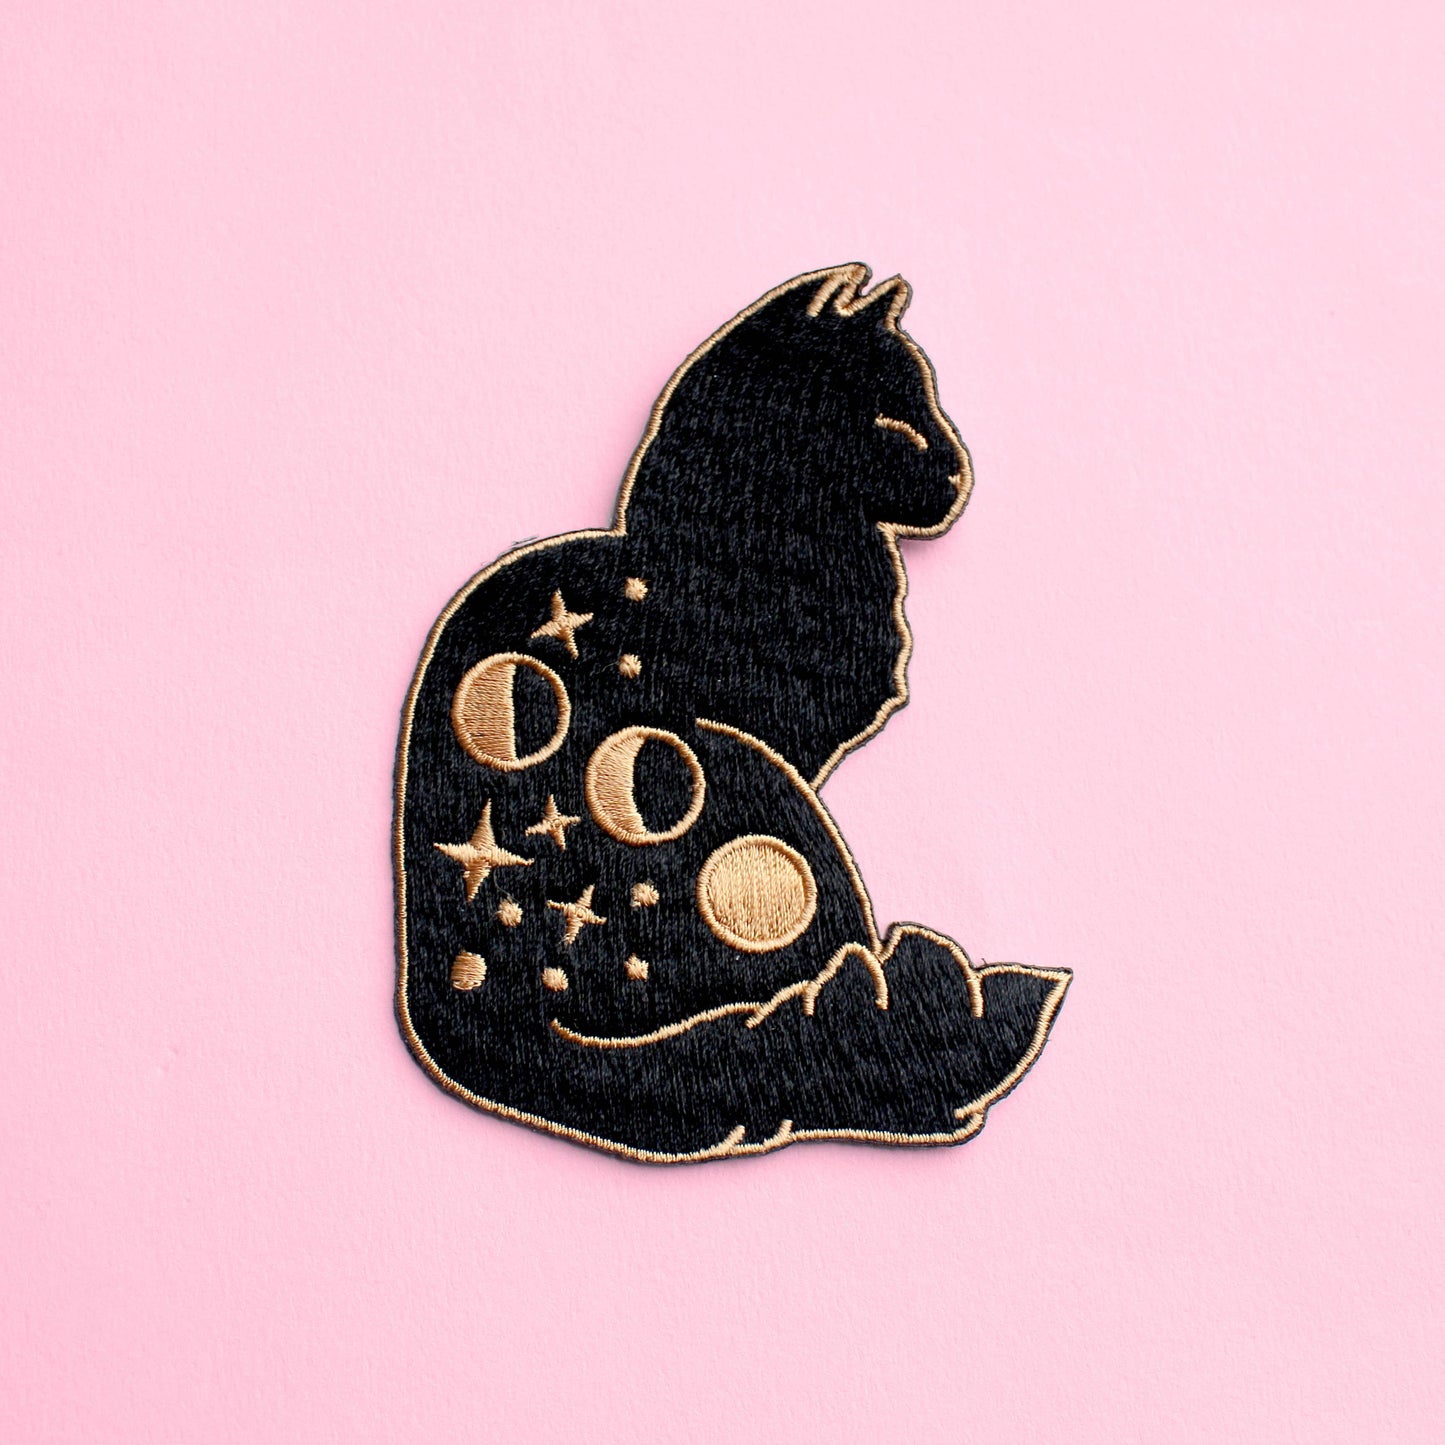 Celestial cat embroidered iron-on patch